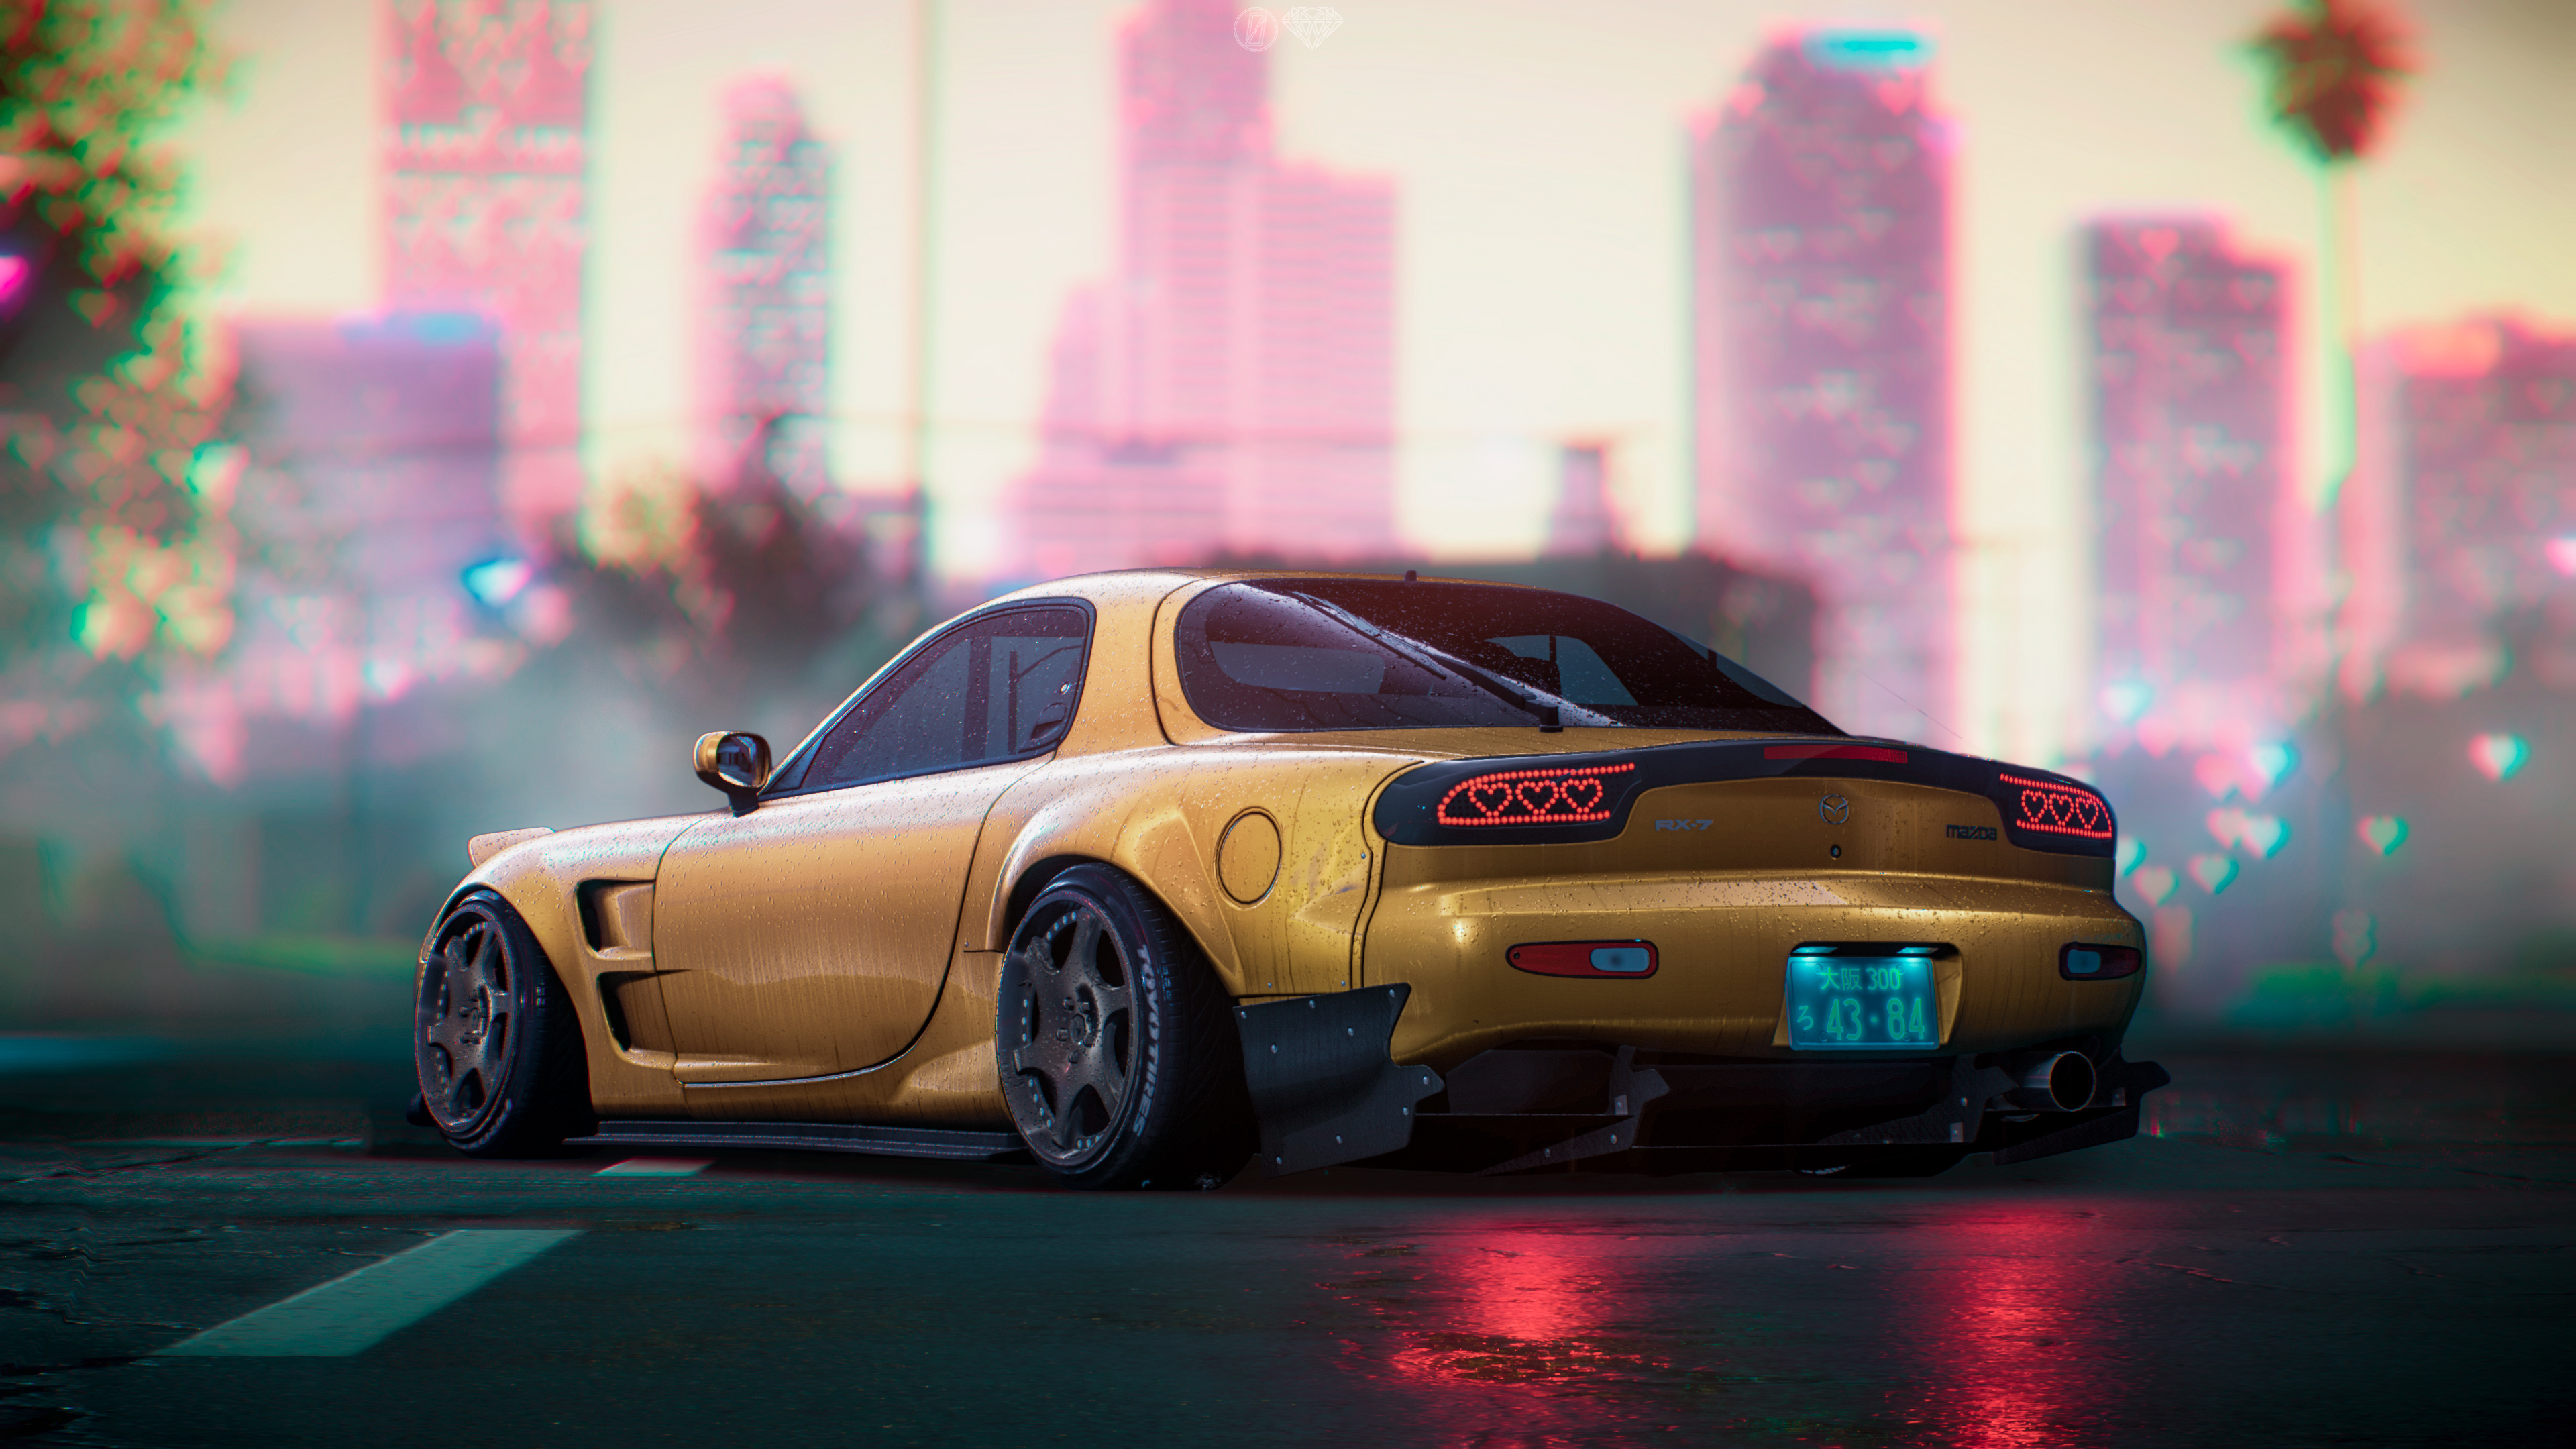 Mazda Rx7 Digital Art 4k, HD Cars, 4k Wallpaper, Image, Background, Photo and Picture